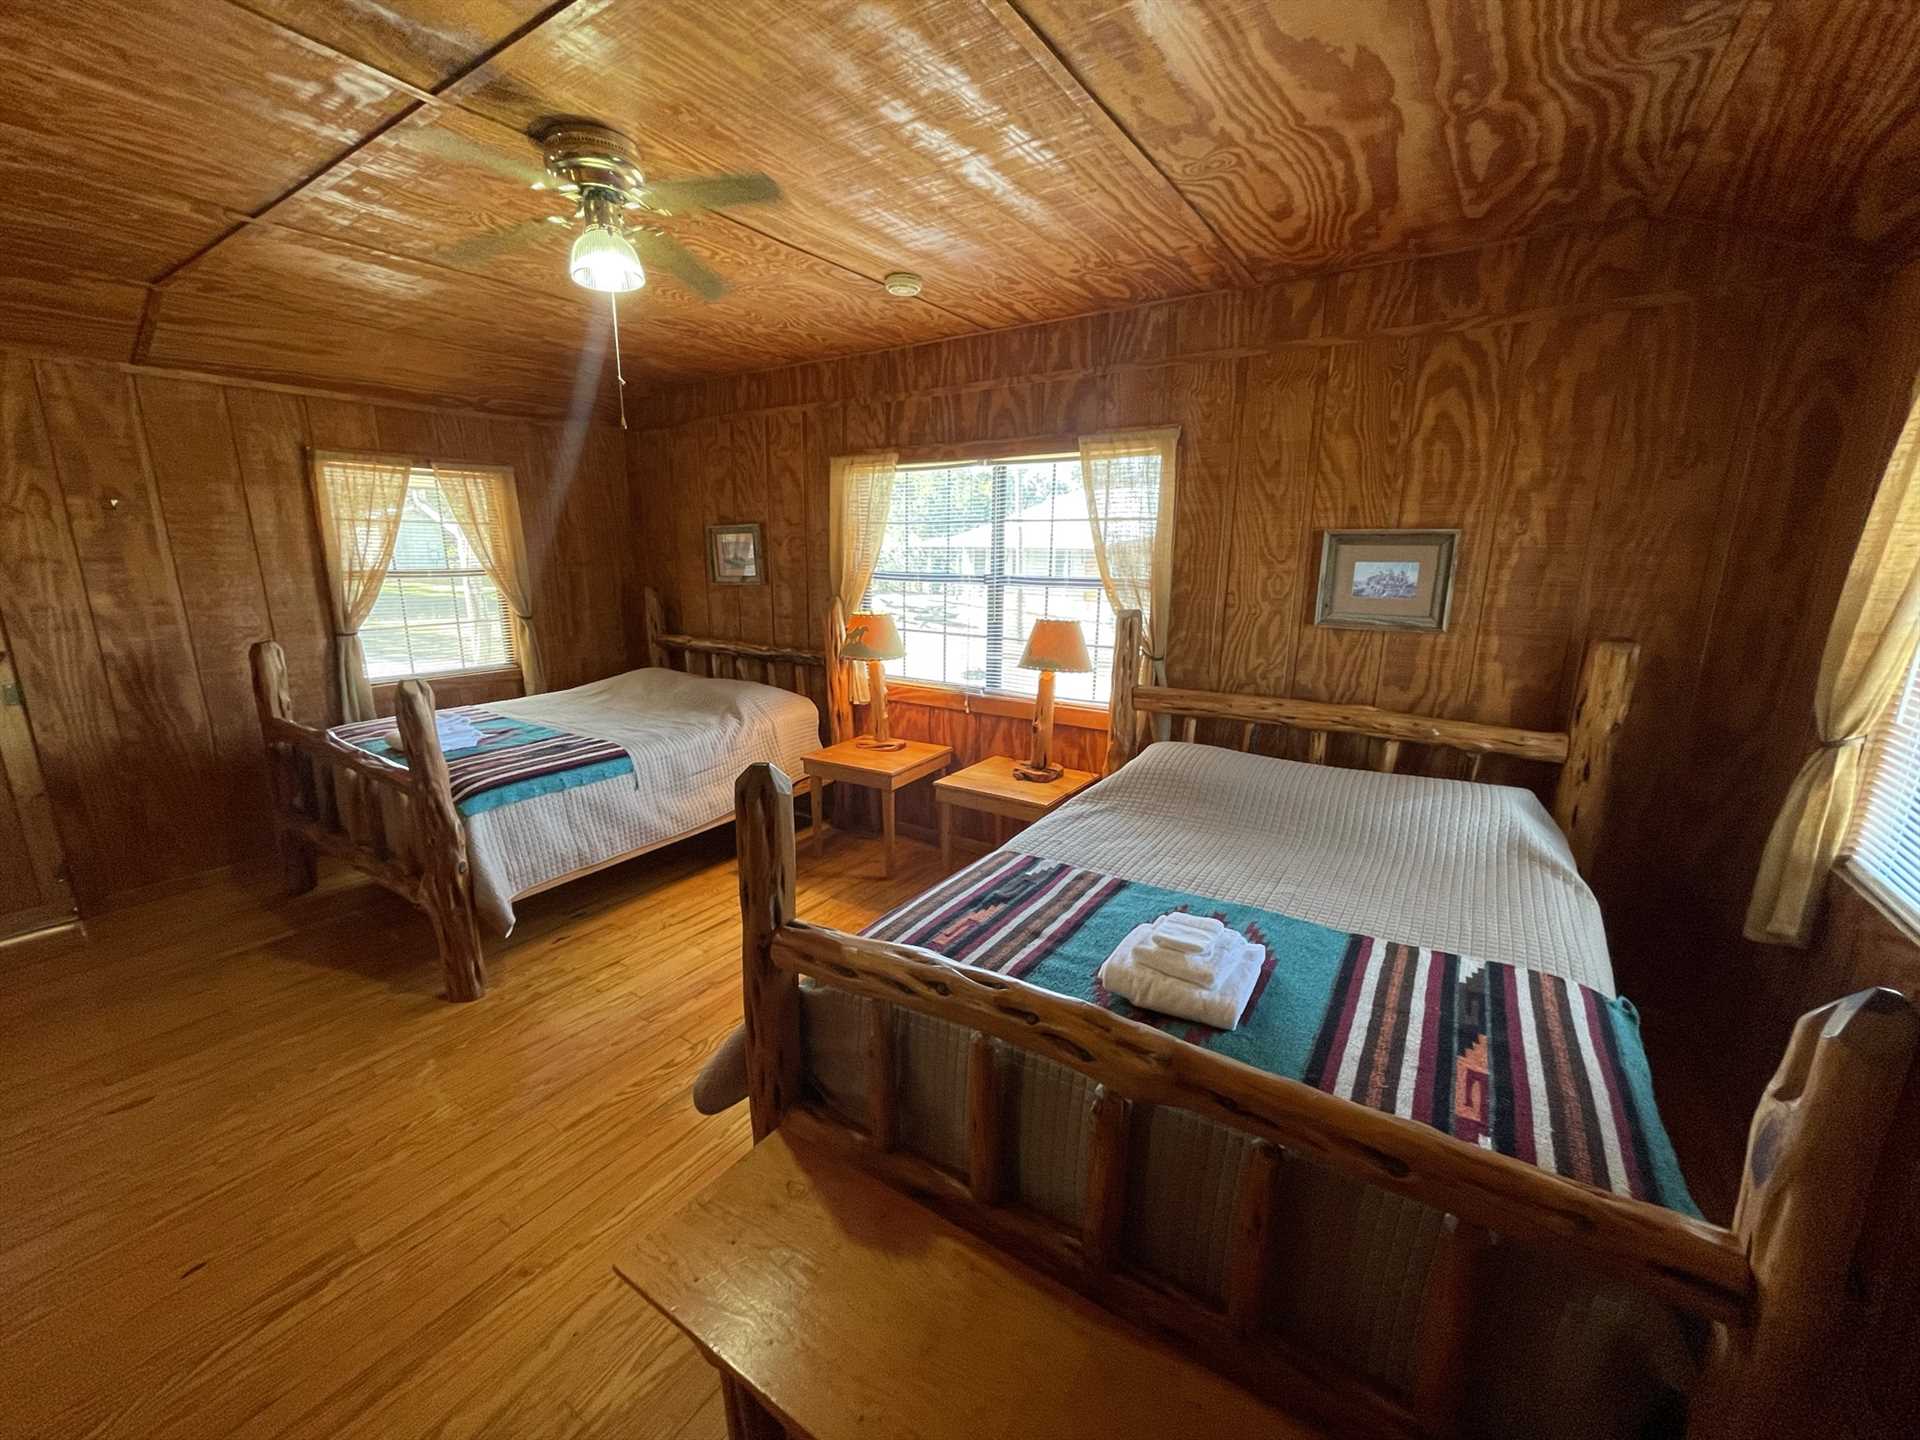                                                 Two queen-sized beds round out the comfy sleeping arrangements here, with room for up to five of your folks. Soft and clean linens are included, as well.